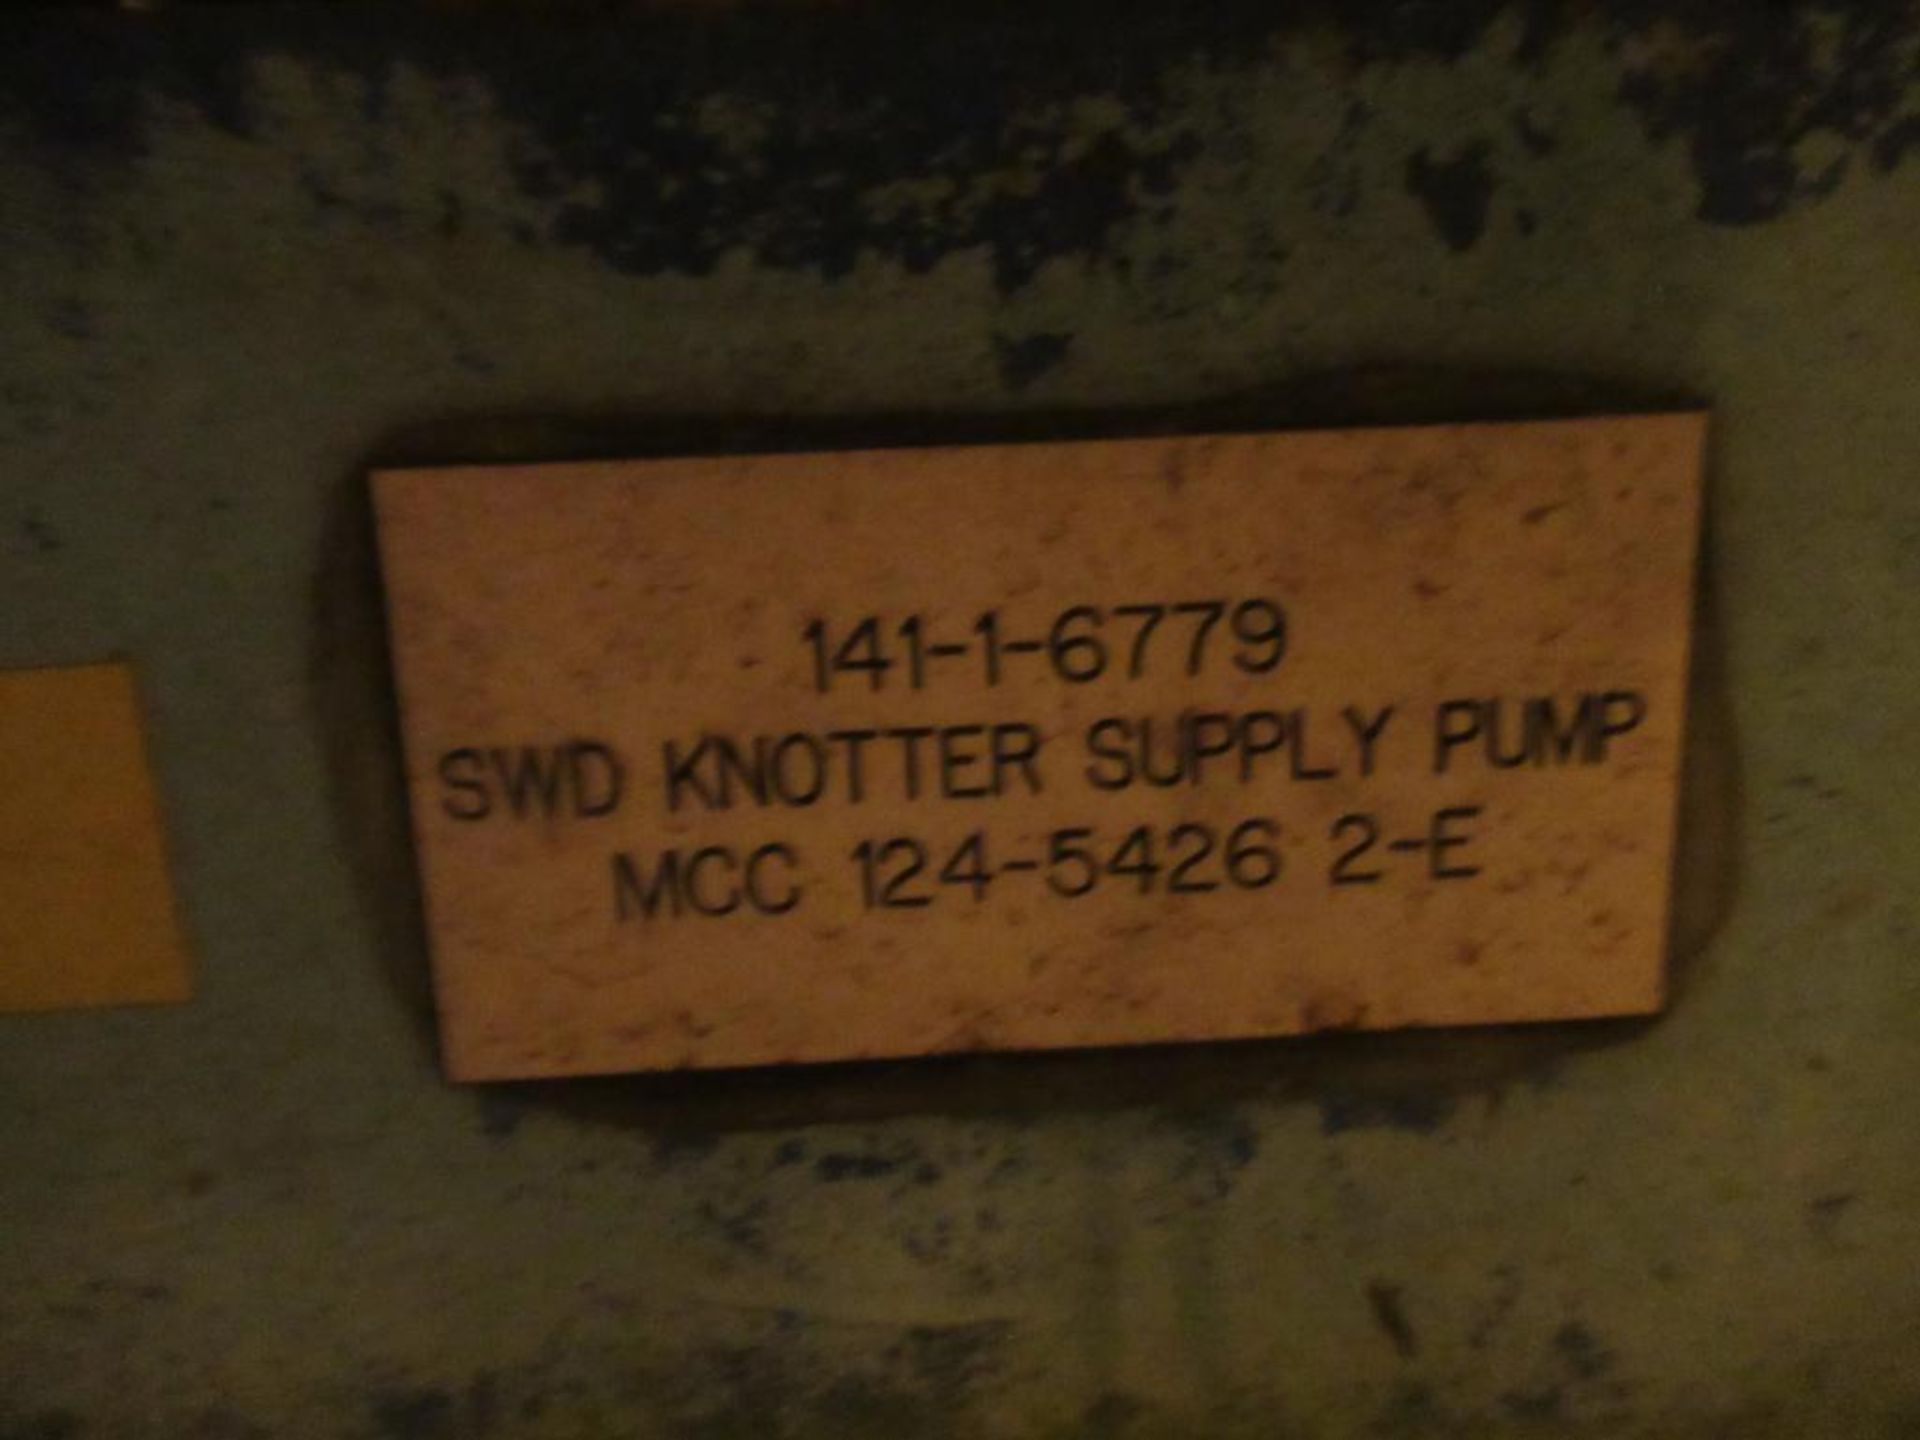 SWD Knotter Supply Pumps - Image 5 of 6